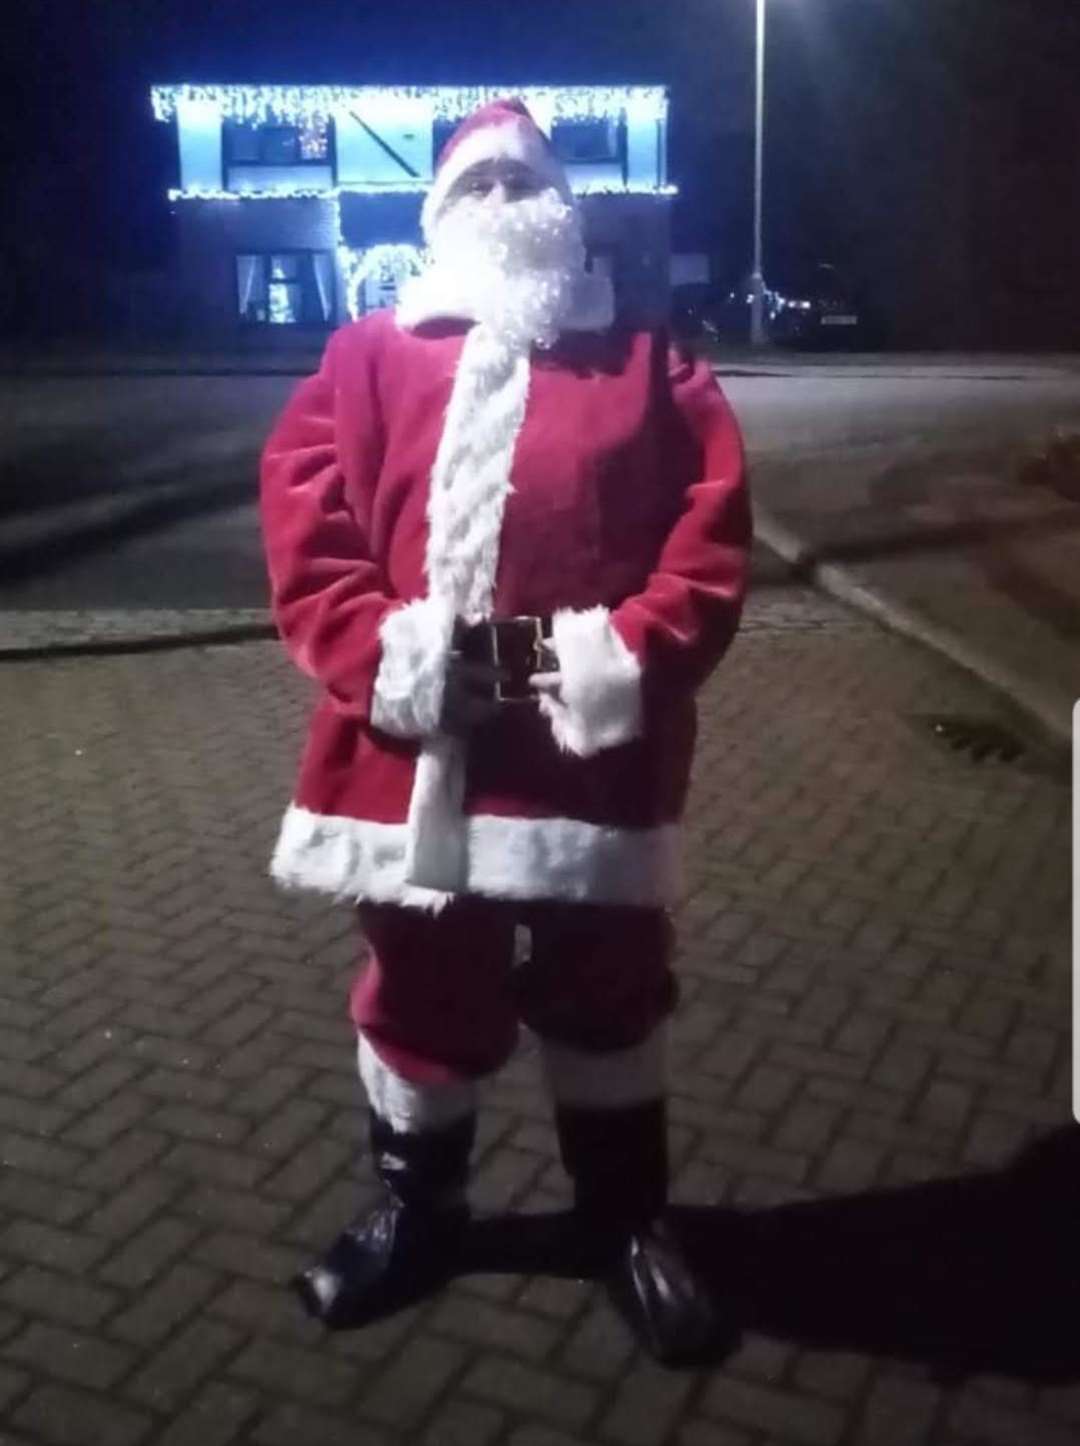 The Bull provided this image of their Father Christmas figure